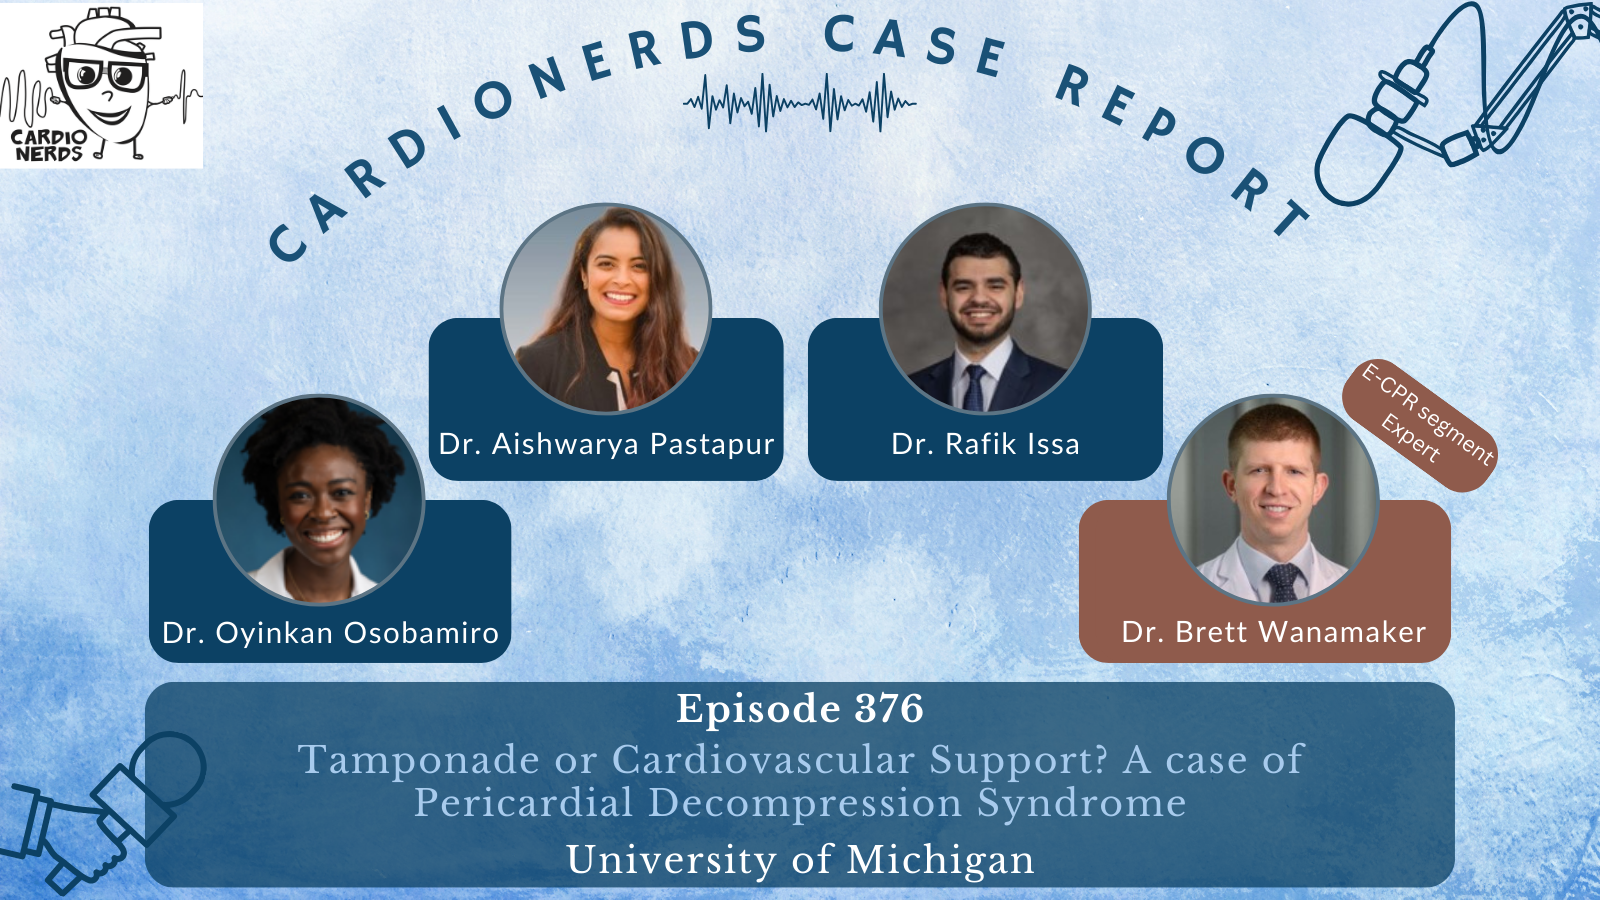 376. Case Report Tamponade or Cardiovascular Support A case of Pericardial Decompression Syndrome - University of Michigan